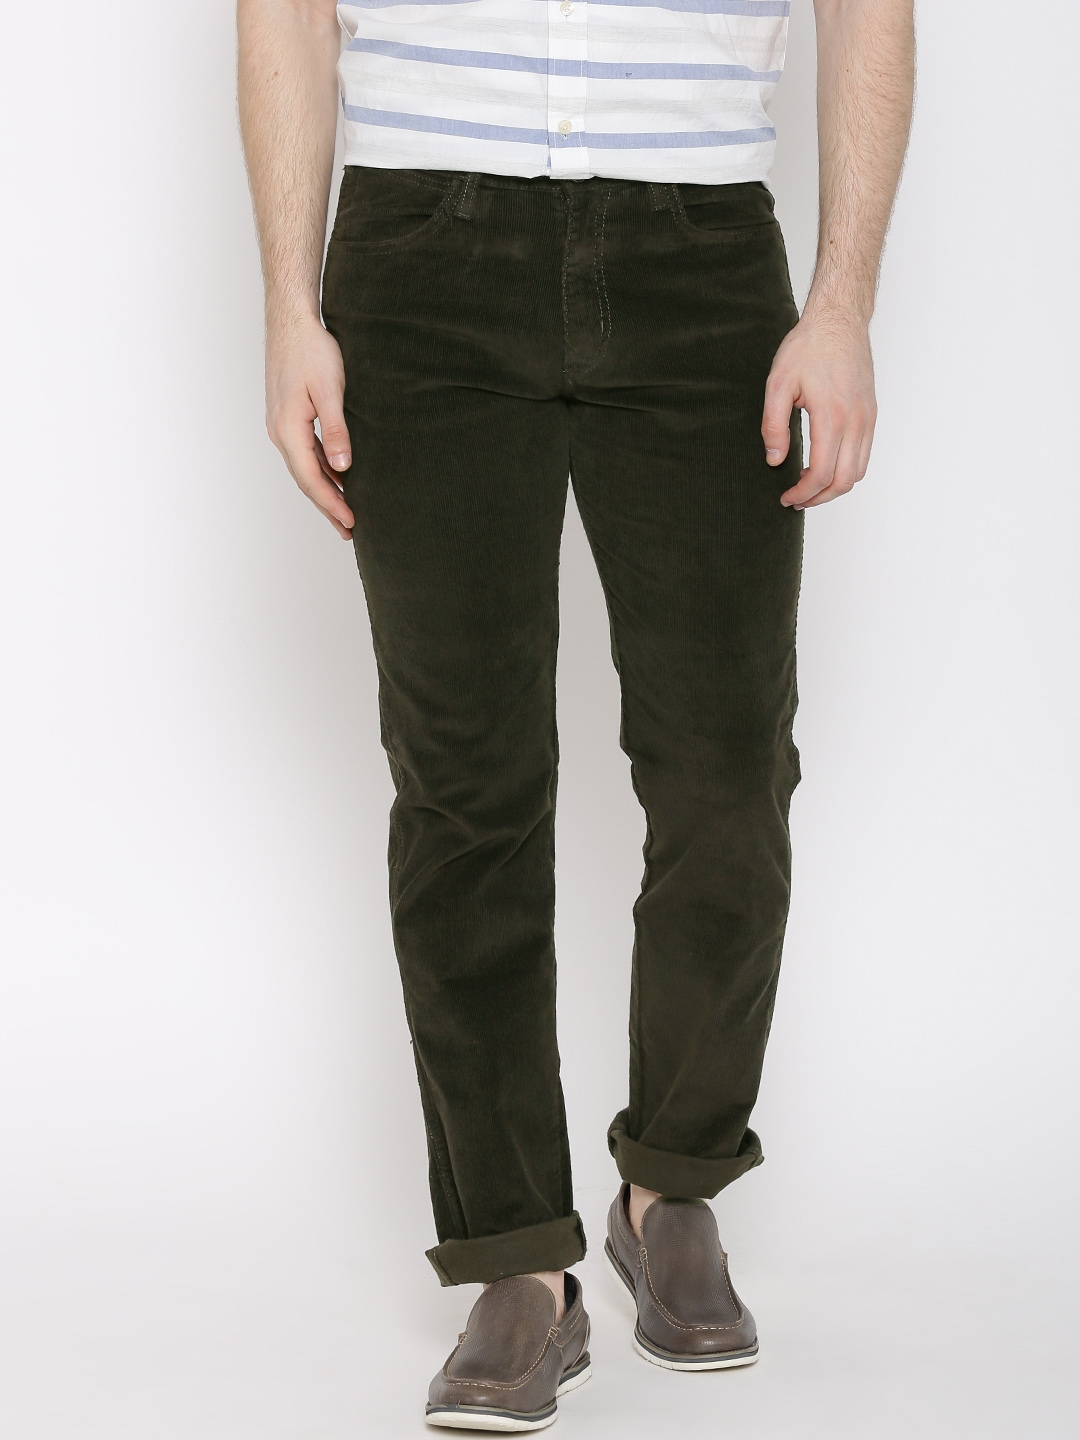 Buy Wrangler Olive Green Corduroy Trousers  Trousers for Men 1044666   Myntra